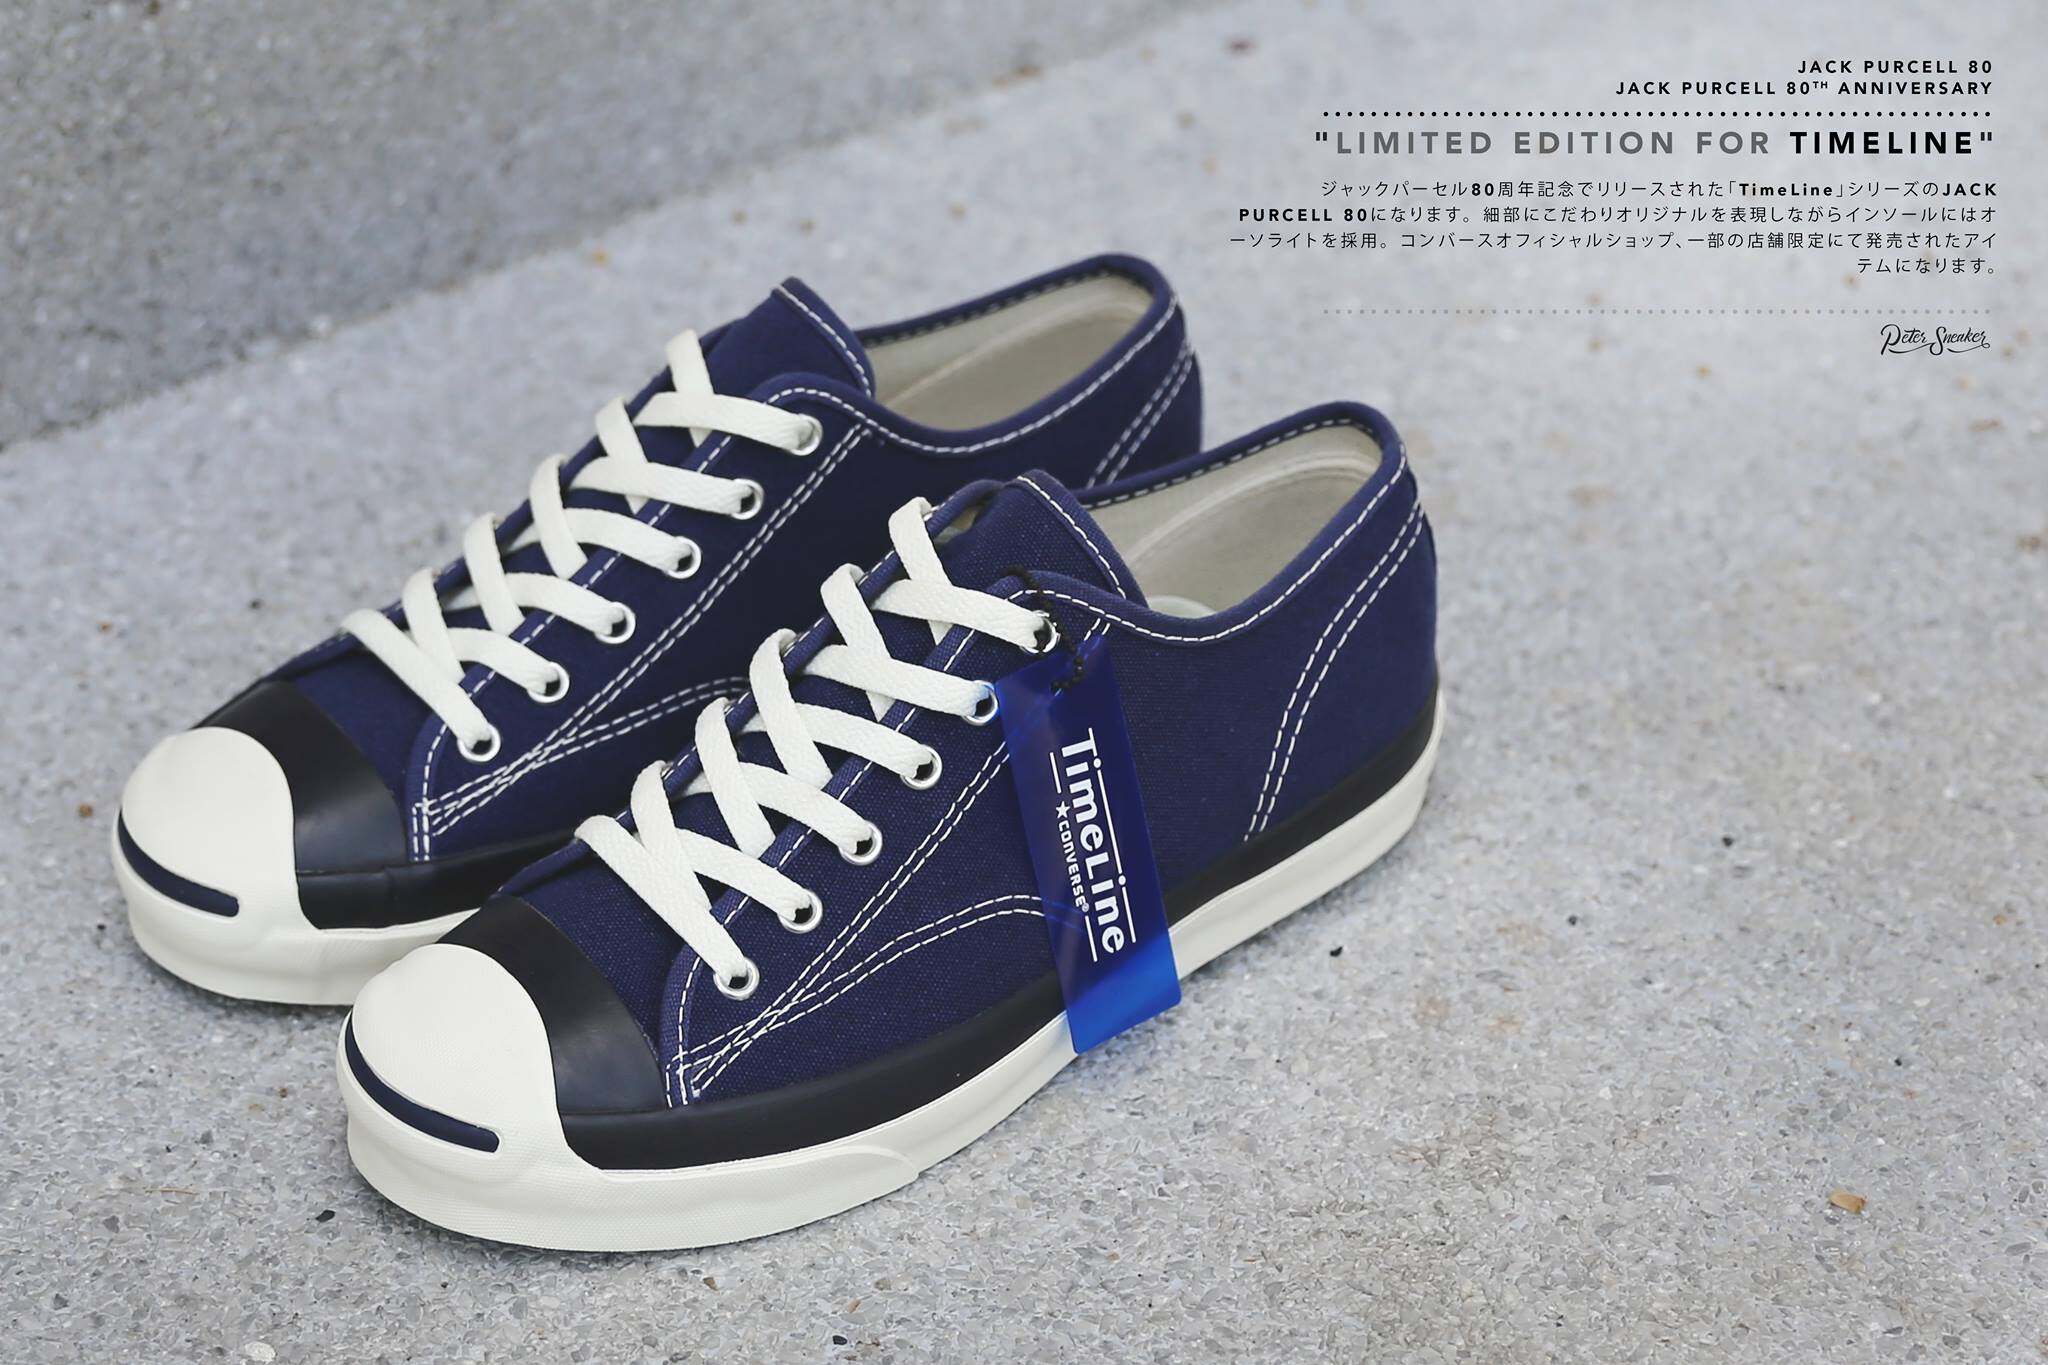 converse jack purcell limited edition